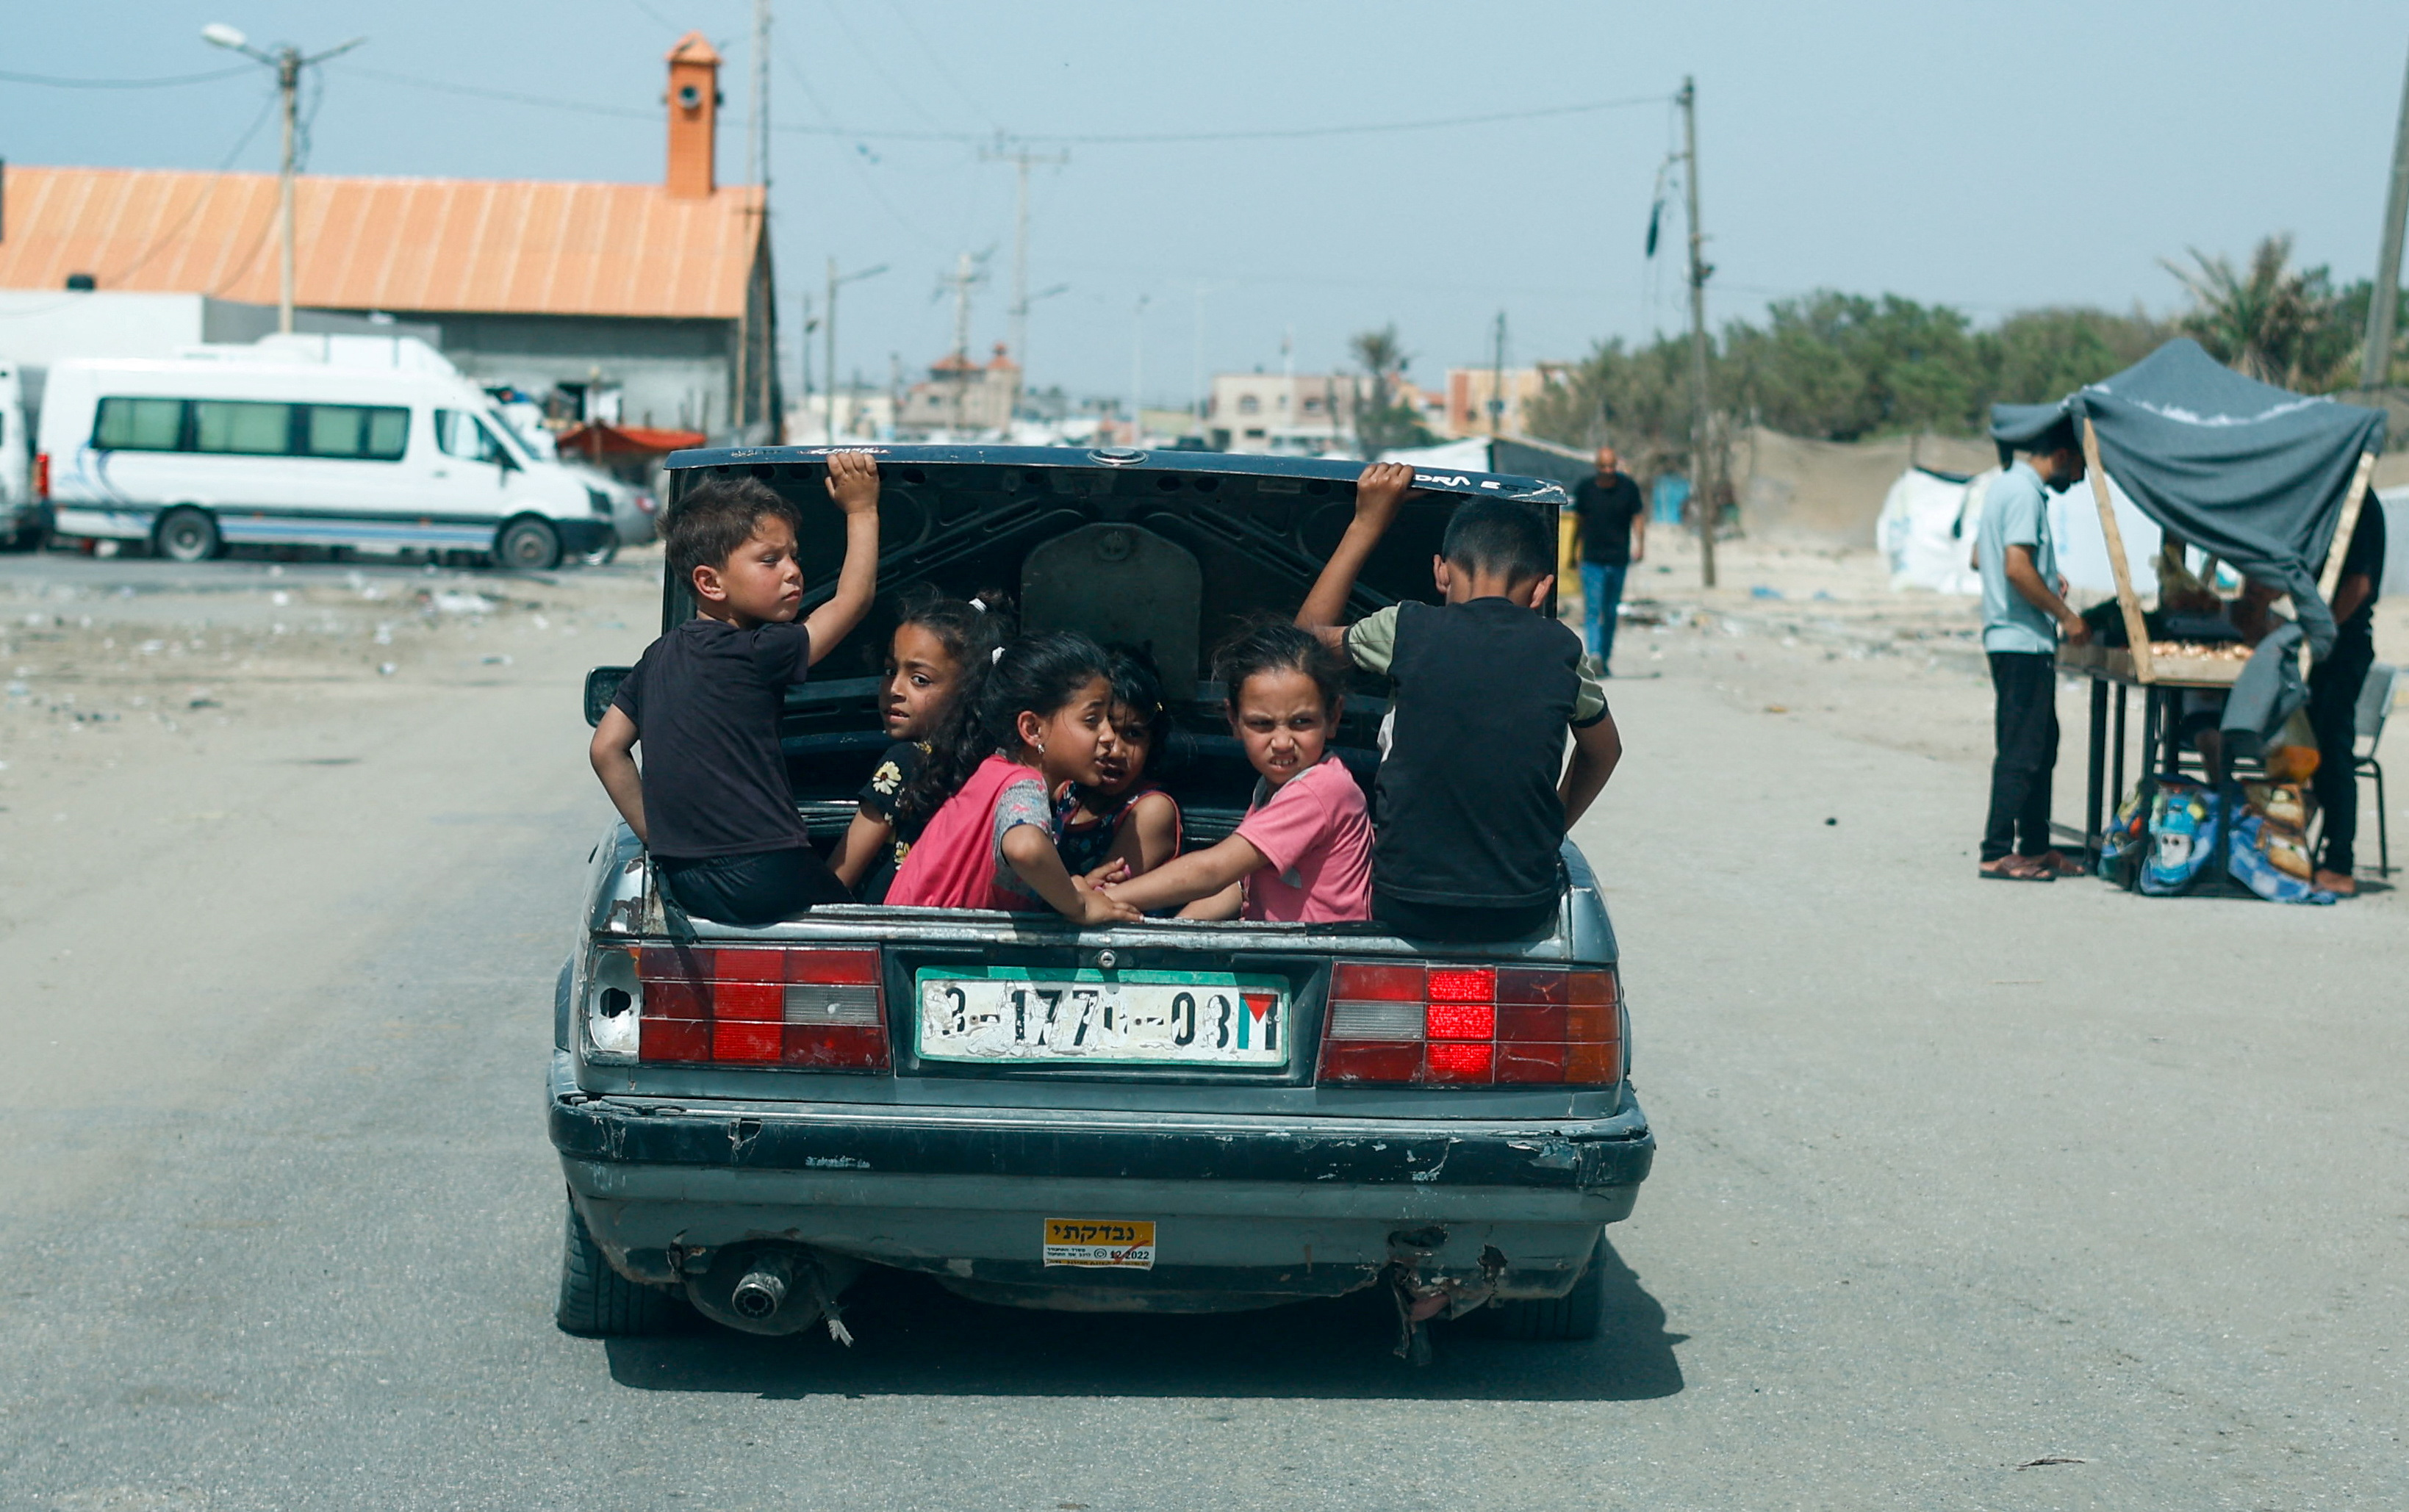 Children sitting in the boot of a car in Rafah, Gaza /Mohammed SALEM /REUTERS